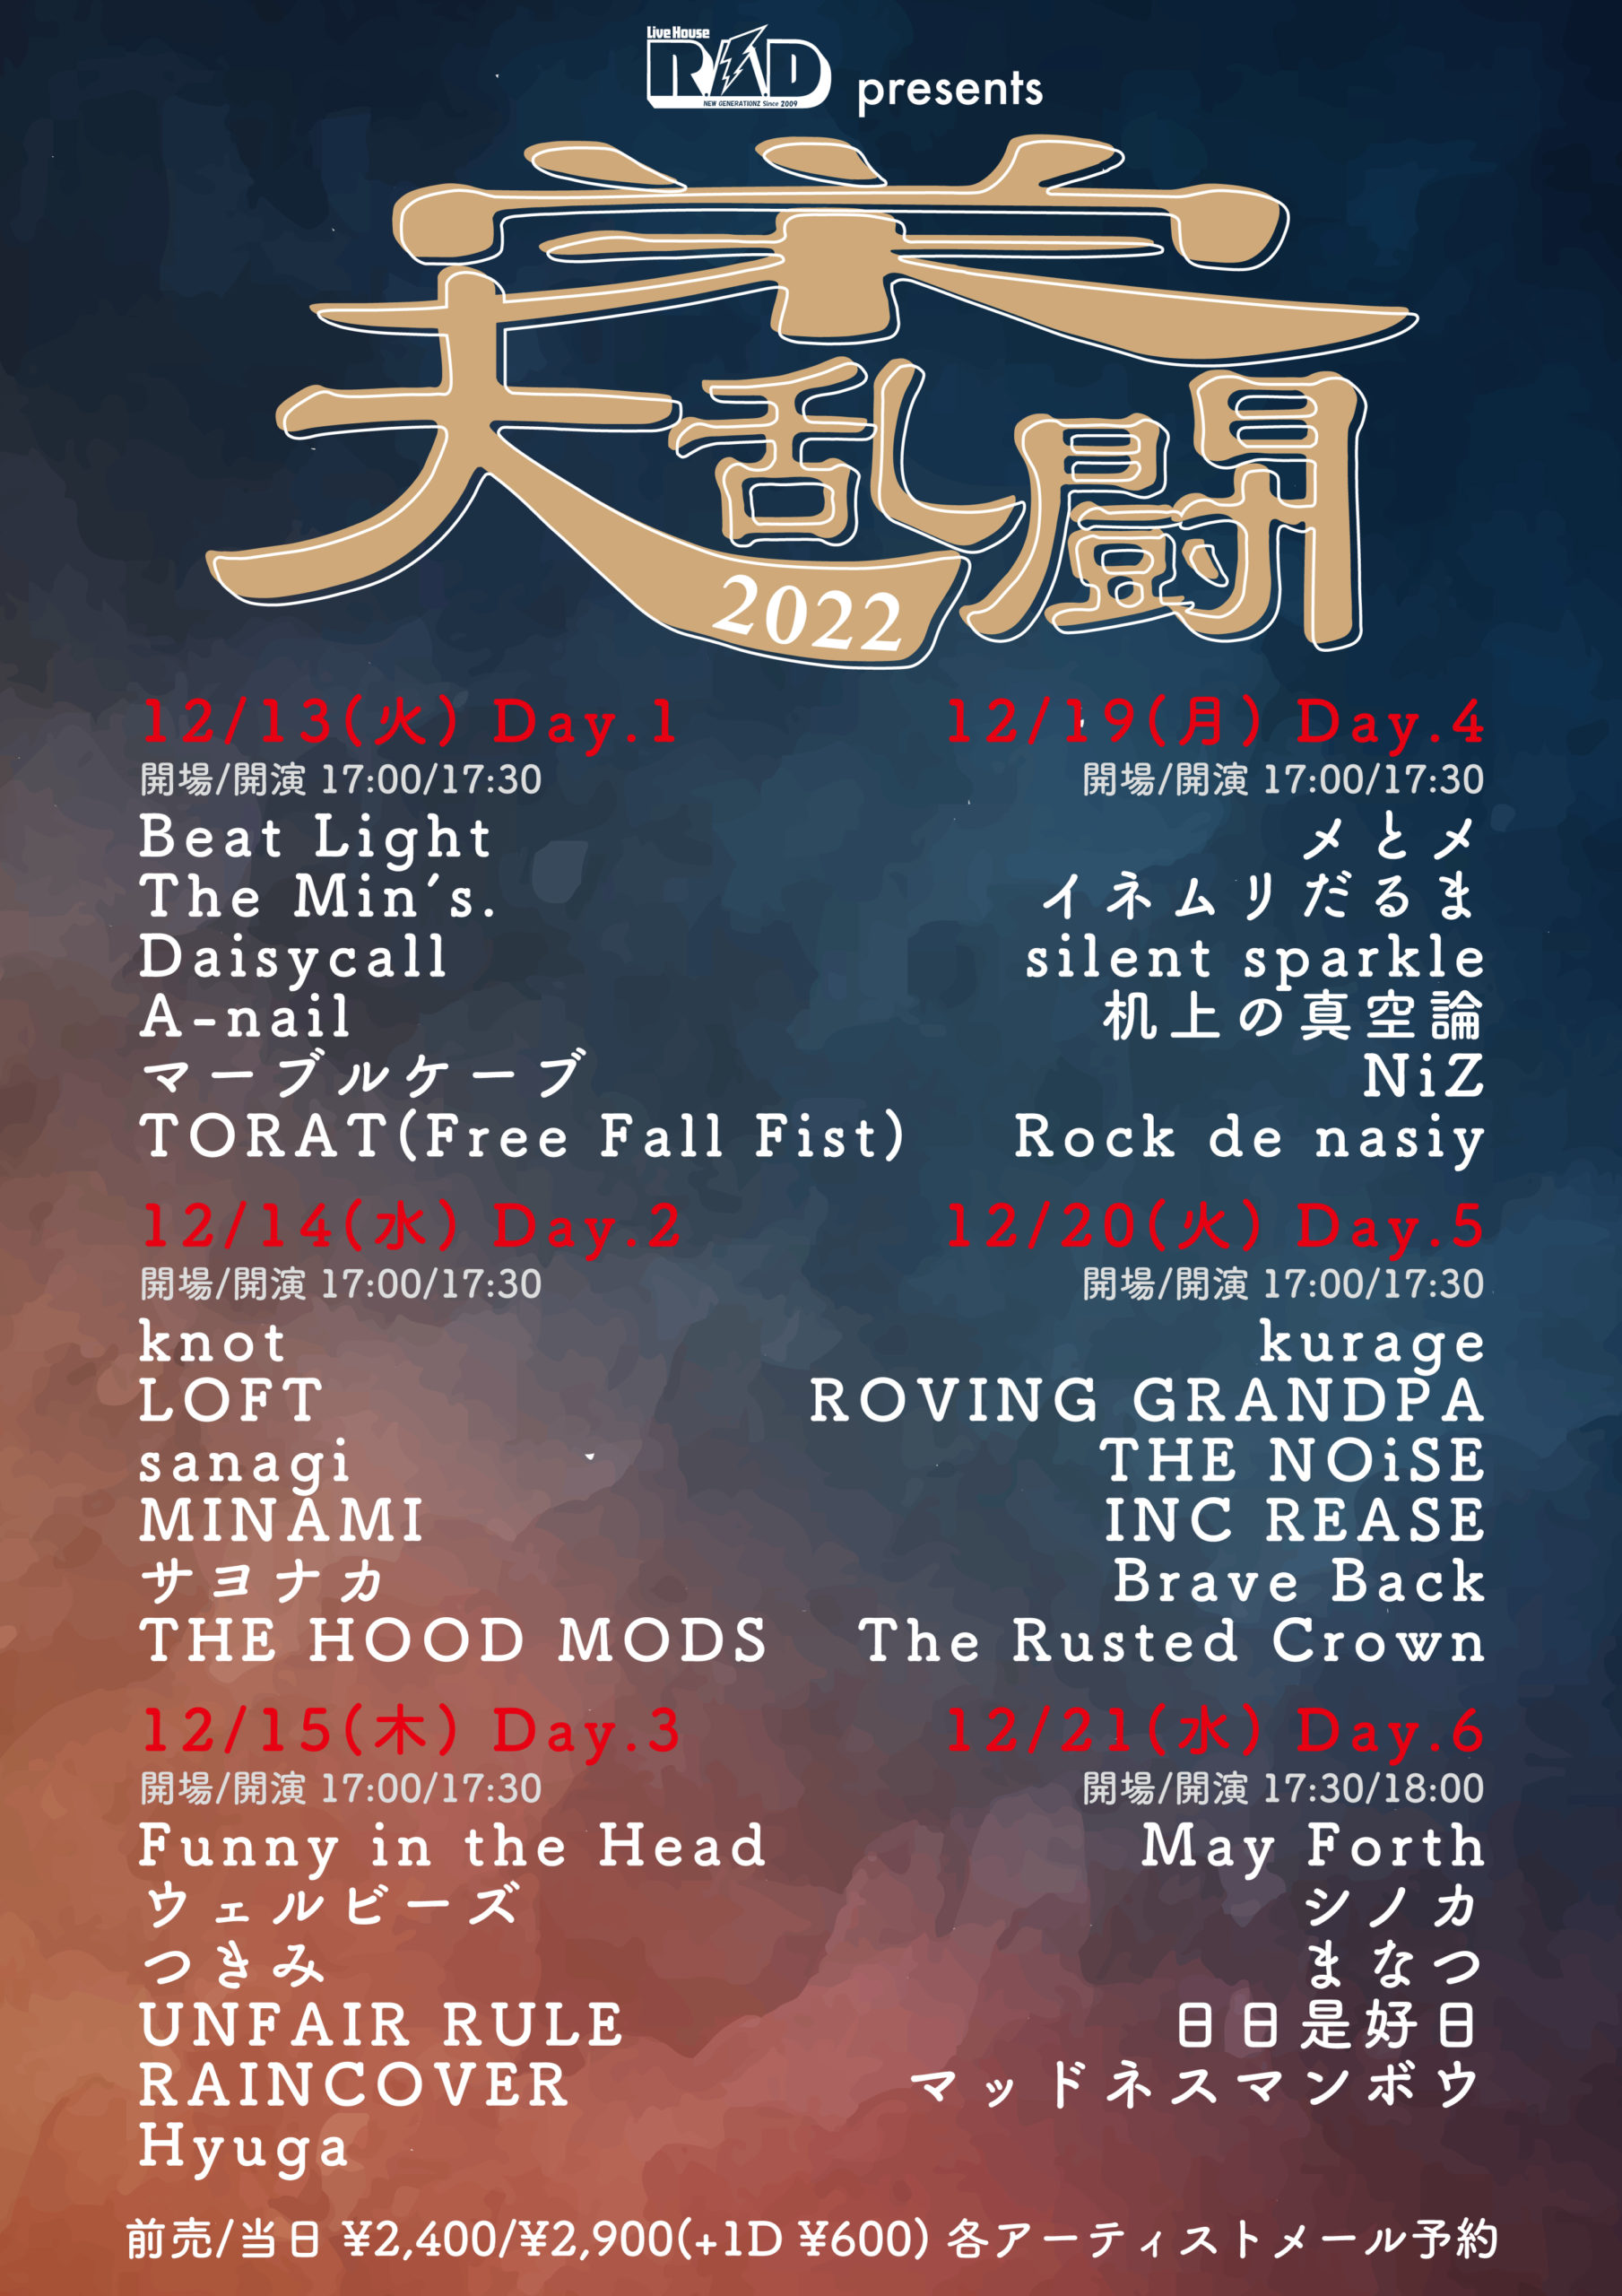 R.A.D presents 栄大乱闘2022 Day.3